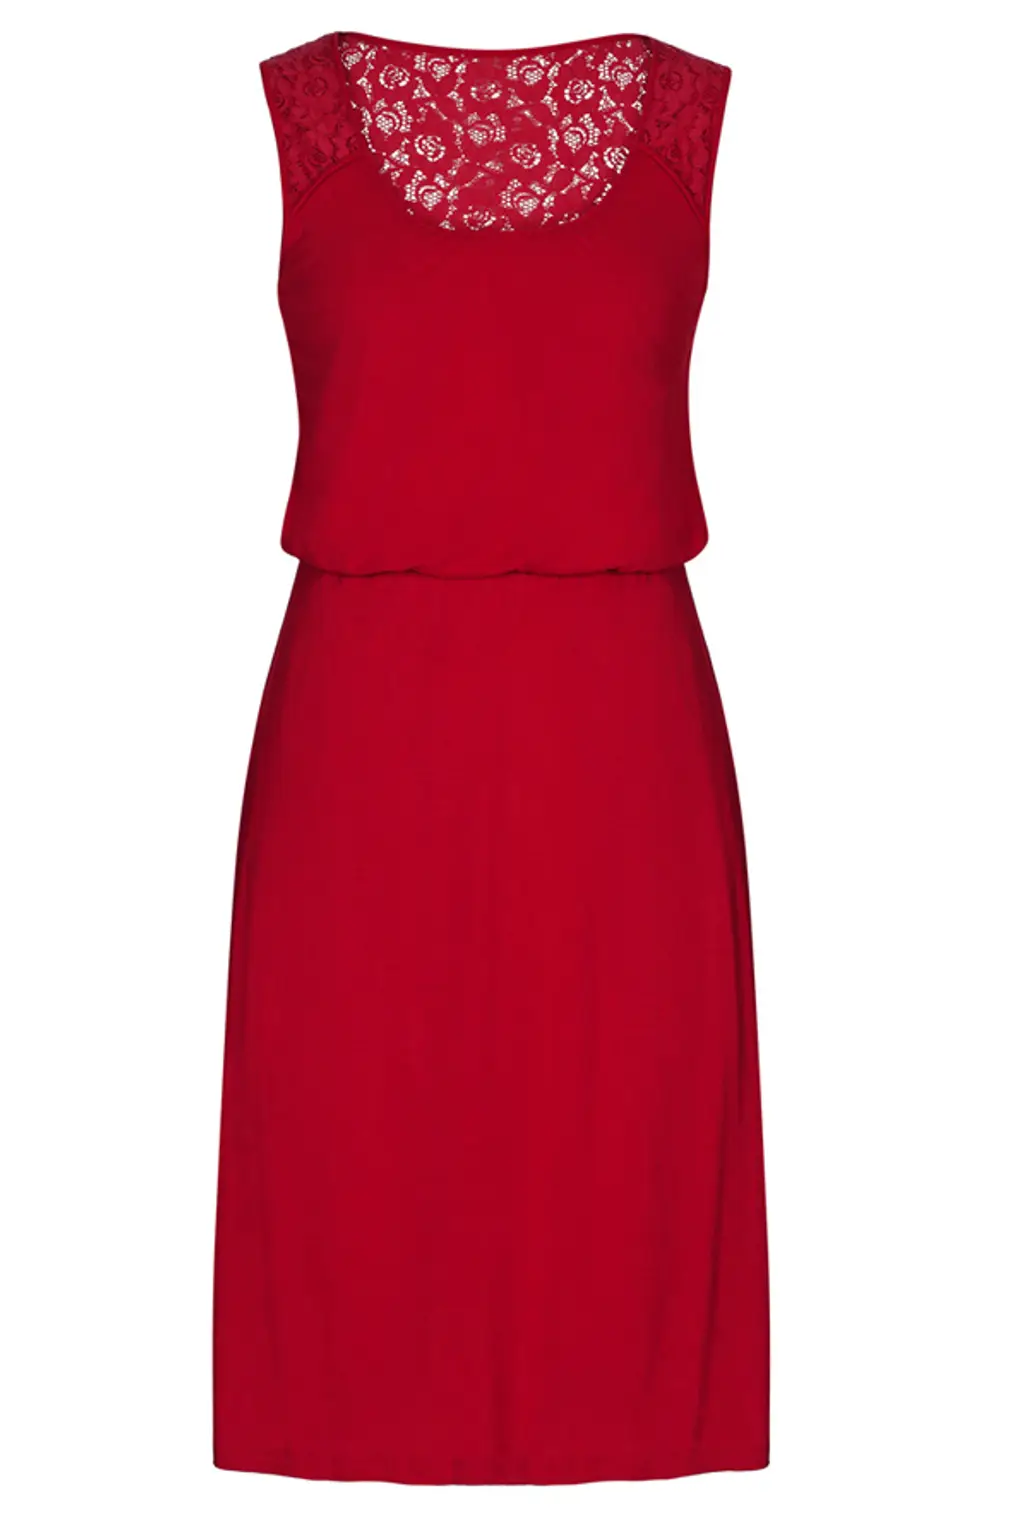 Long Tall Sally (LTS) Red Lace Back Summer Dress